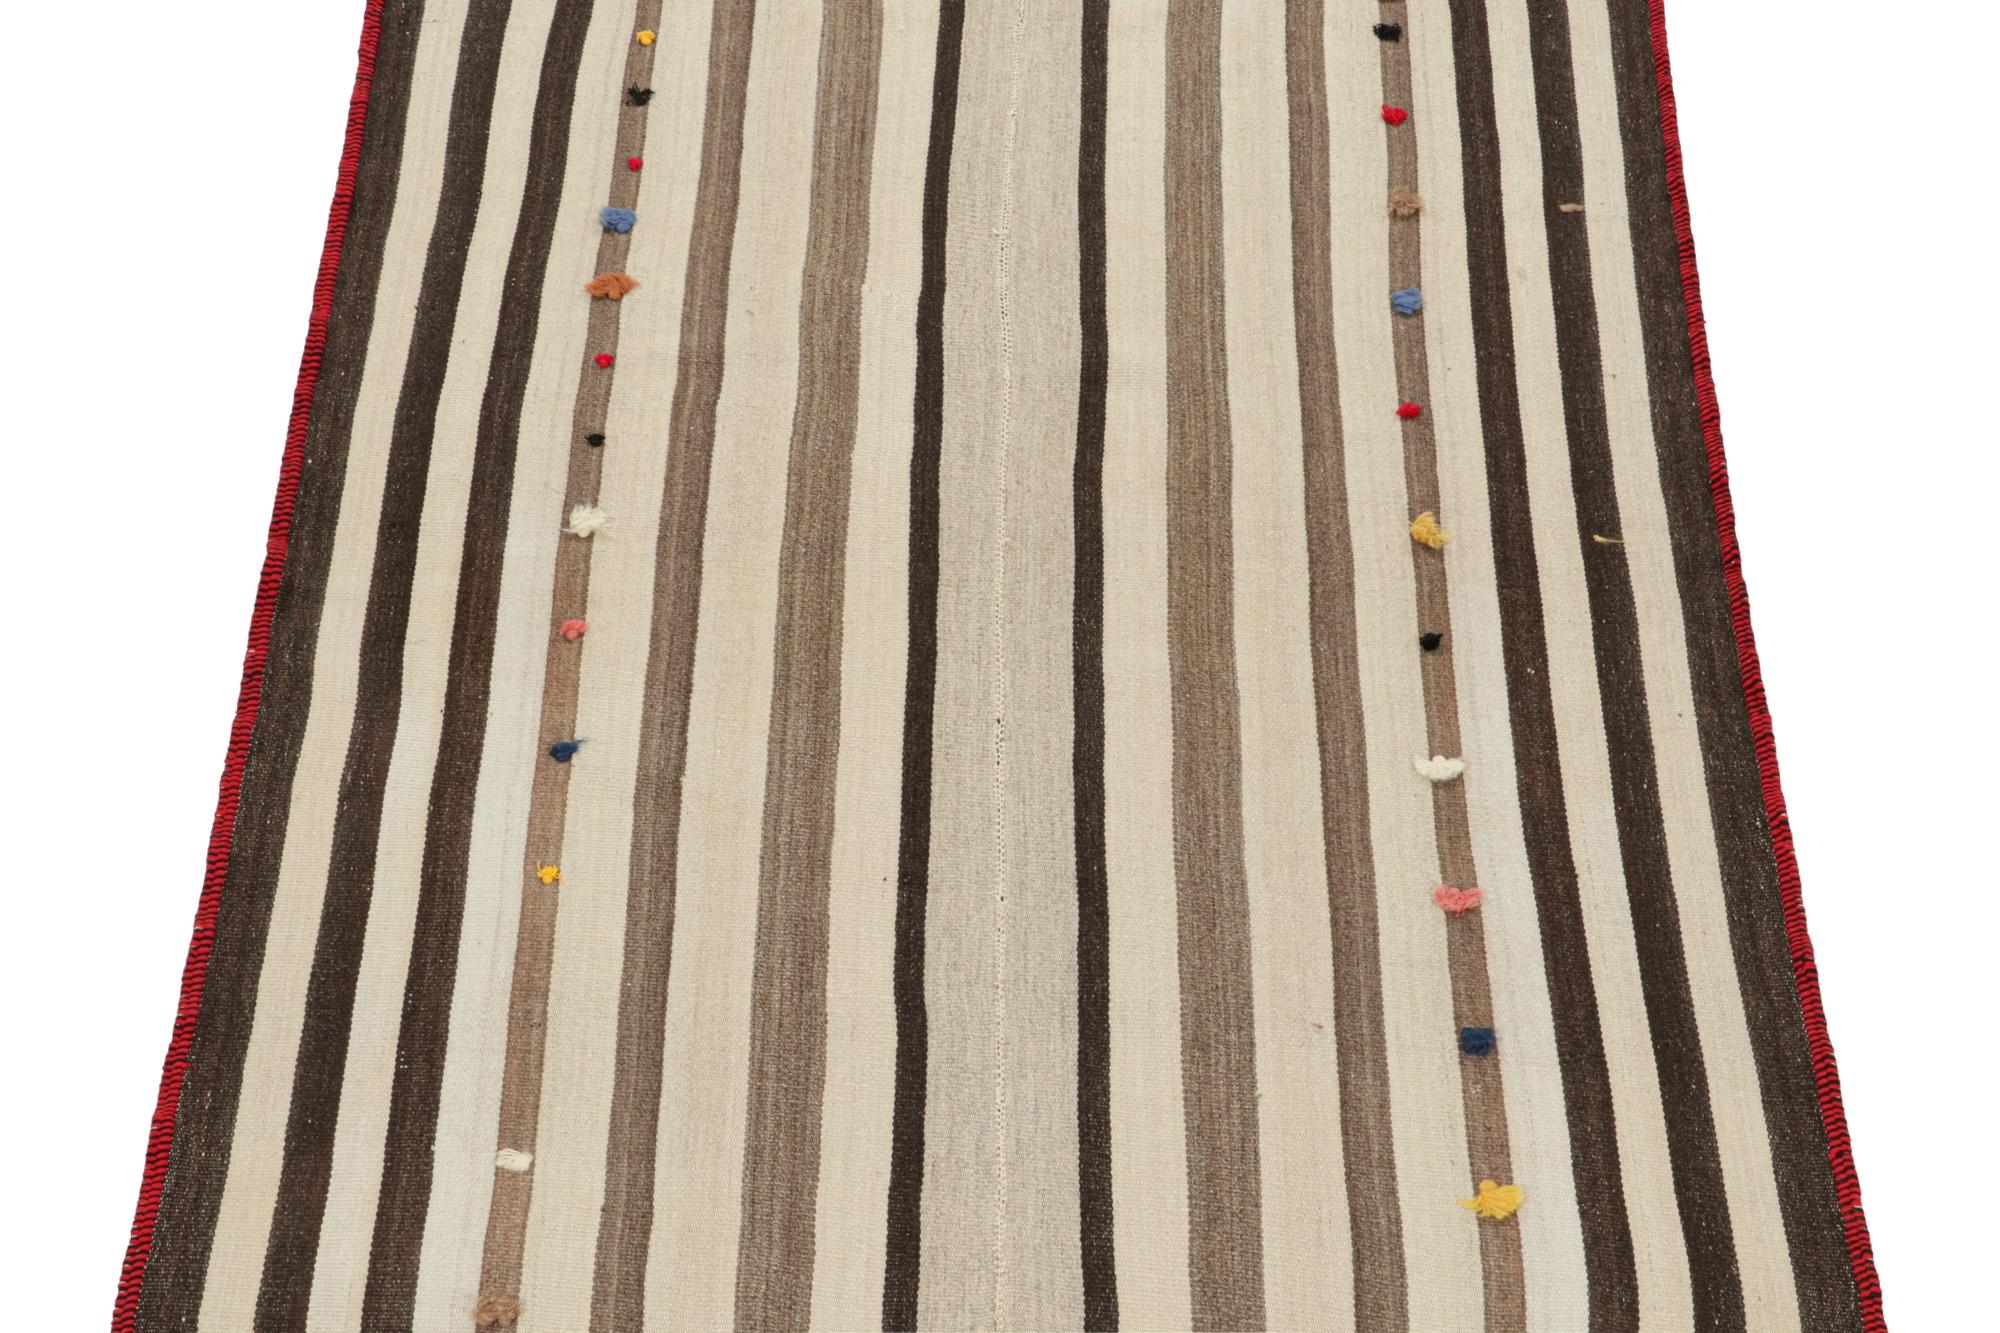 Vintage Persian Kilim in Beige-Brown Stripes, Panel Style In Good Condition For Sale In Long Island City, NY